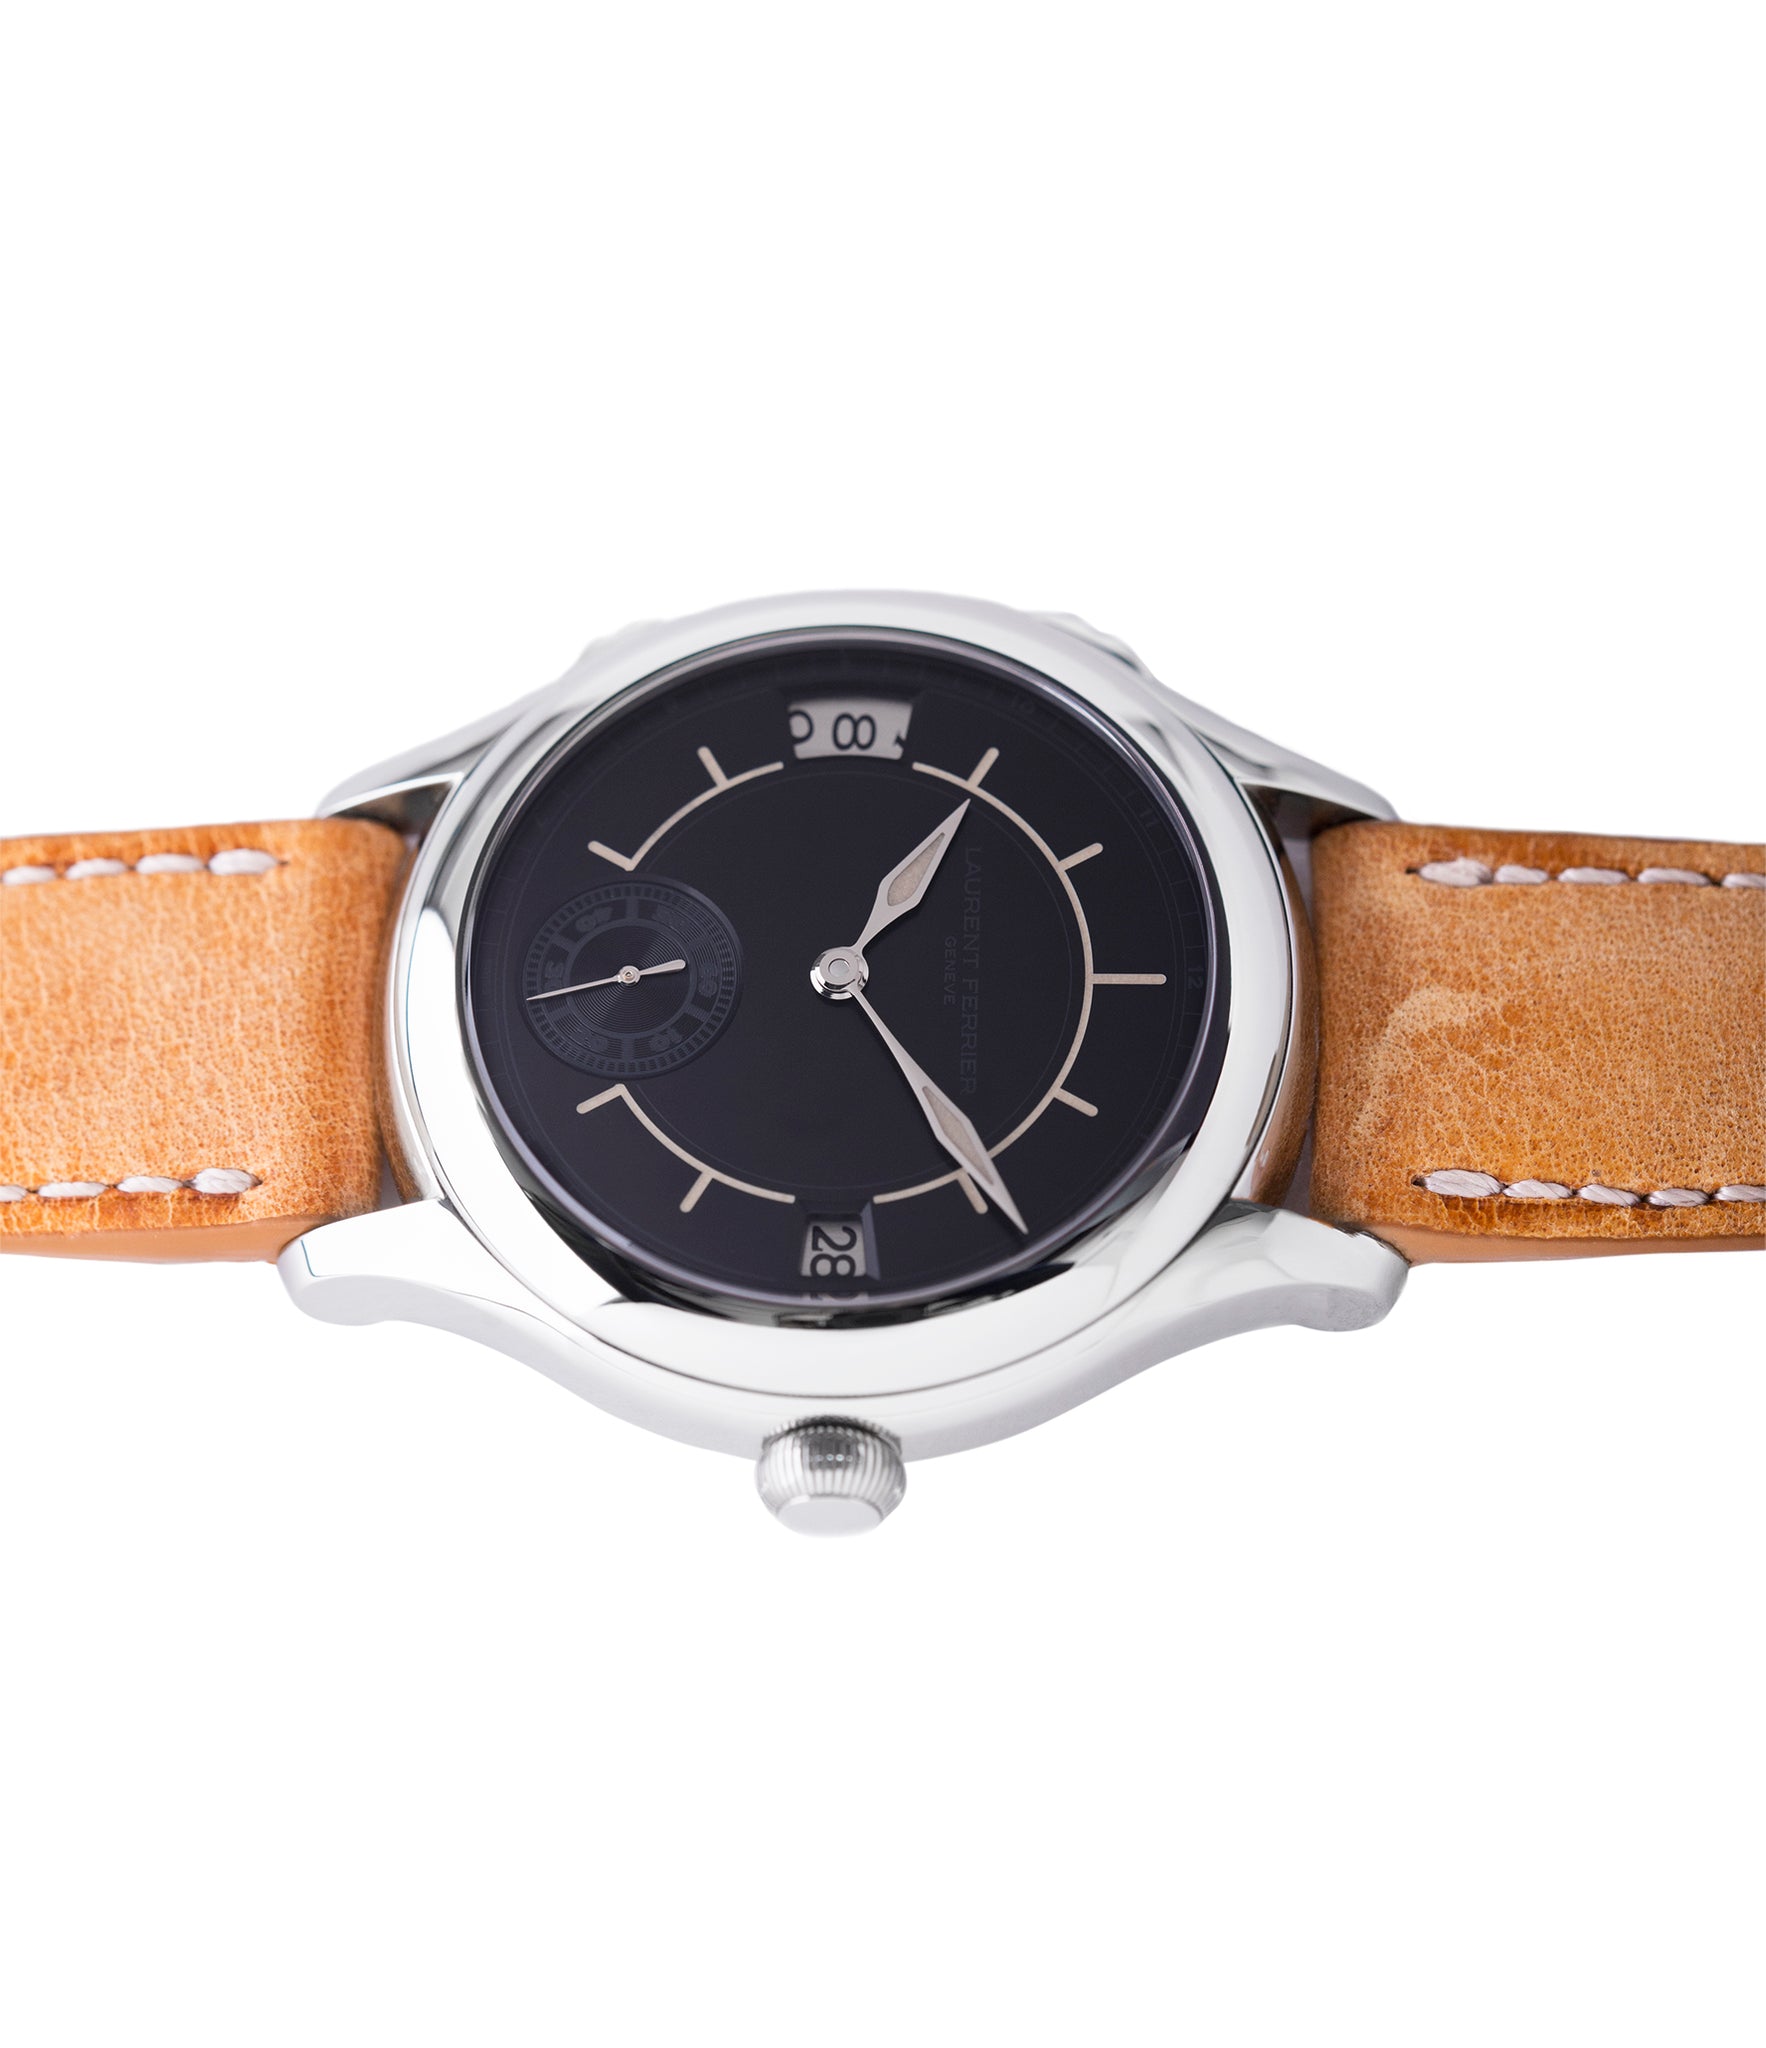 luxury Traveller watch Laurent Ferrier Galet Boreal steel dual-timezone black dial dress watch for sale online at A Collected Man London approved seller of pre-owned Laurent Ferrier independent watchmakers